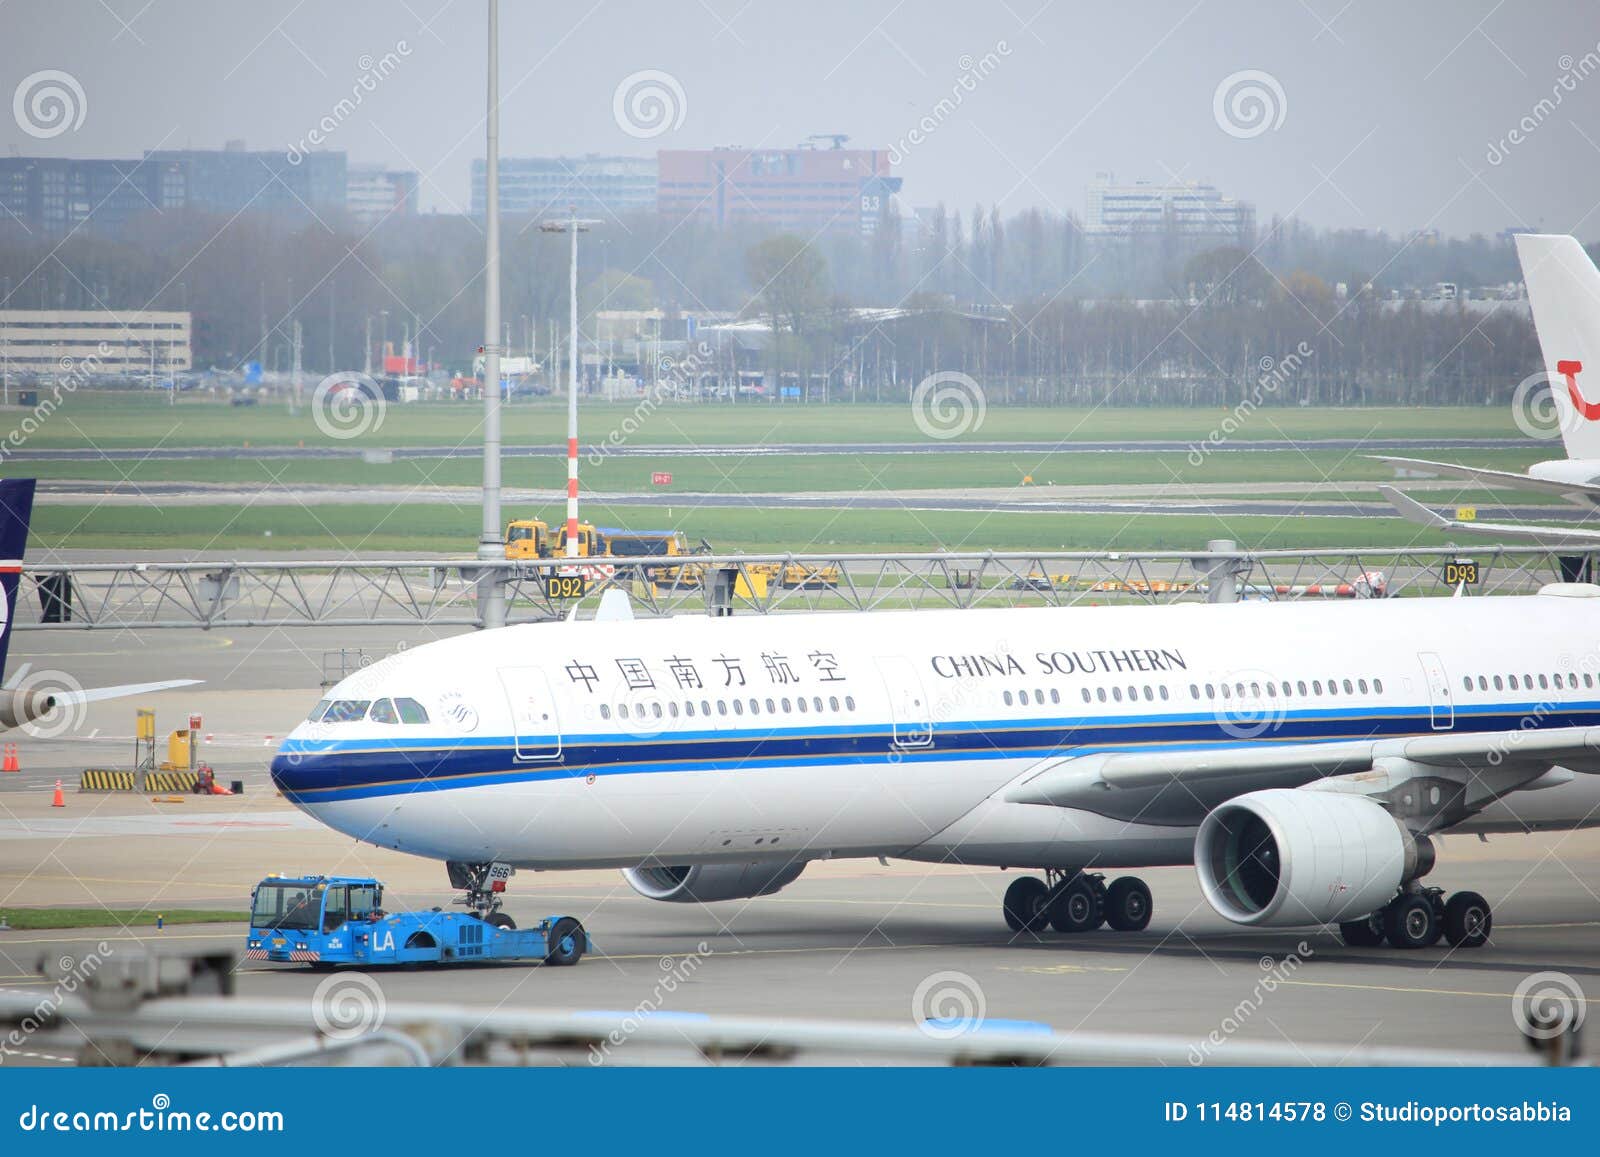 Amsterdam Airport Schiphol The Netherlands - April 14th 2018: B-5966 China Southern Airlines ...